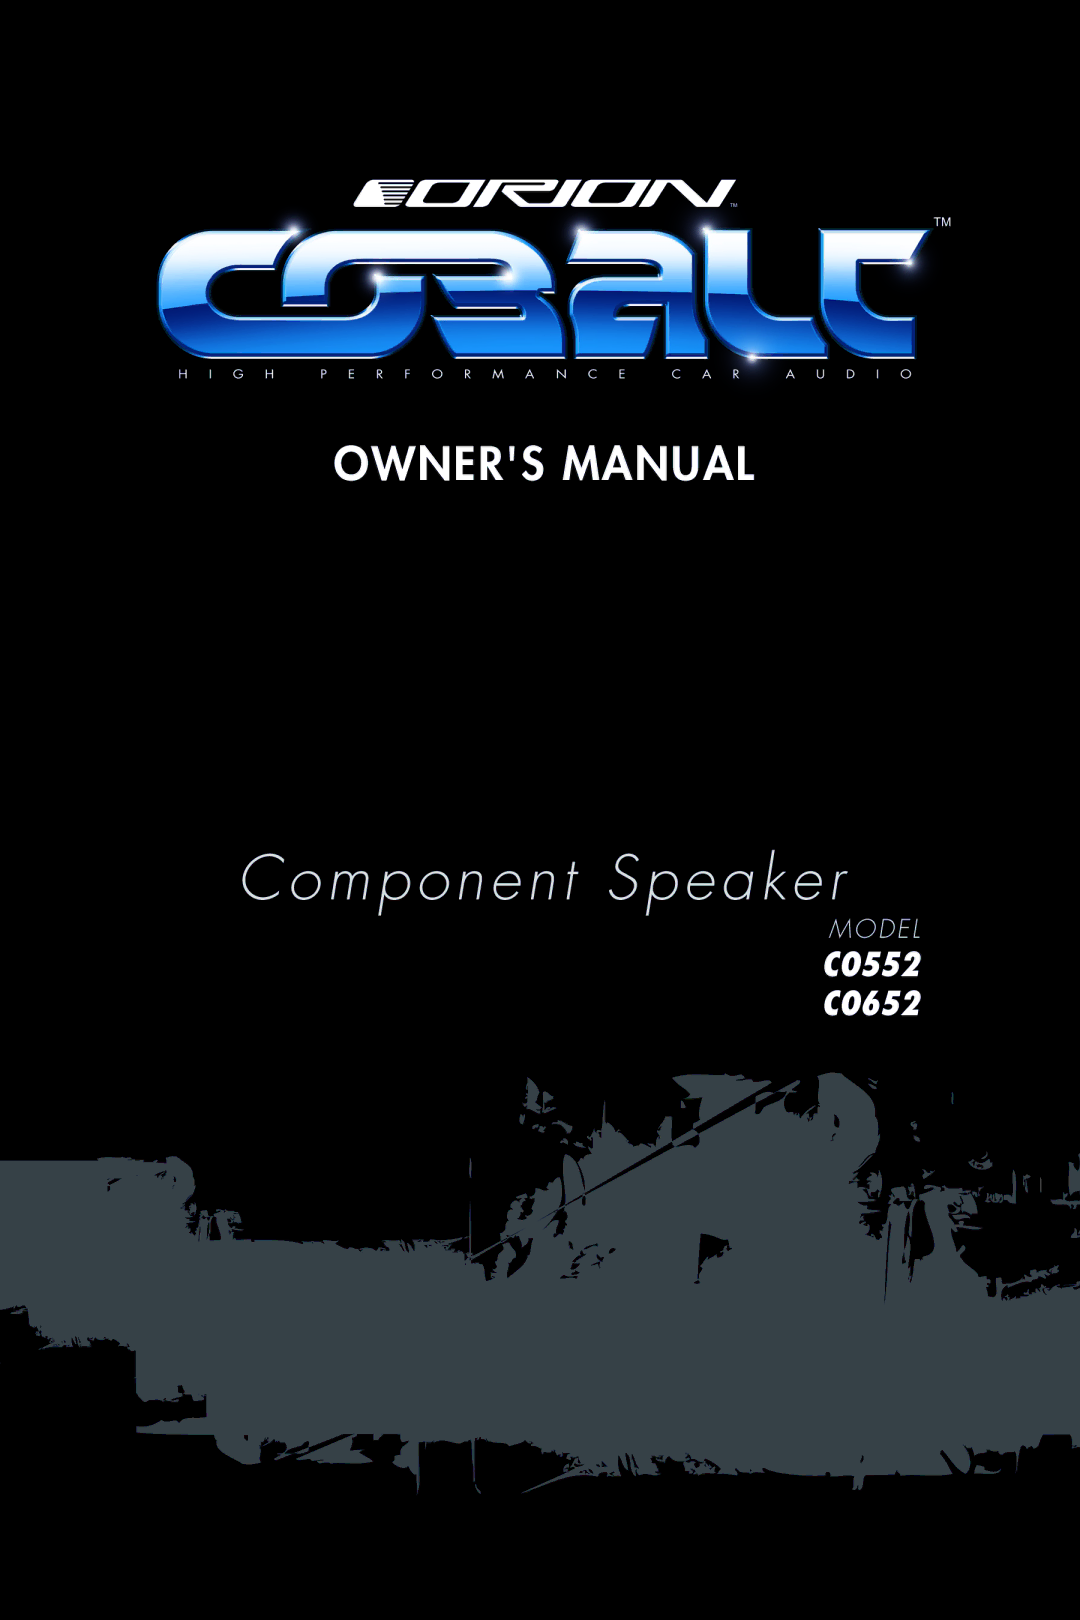 Directed Electronics CO552, CO652 owner manual Component Speaker 